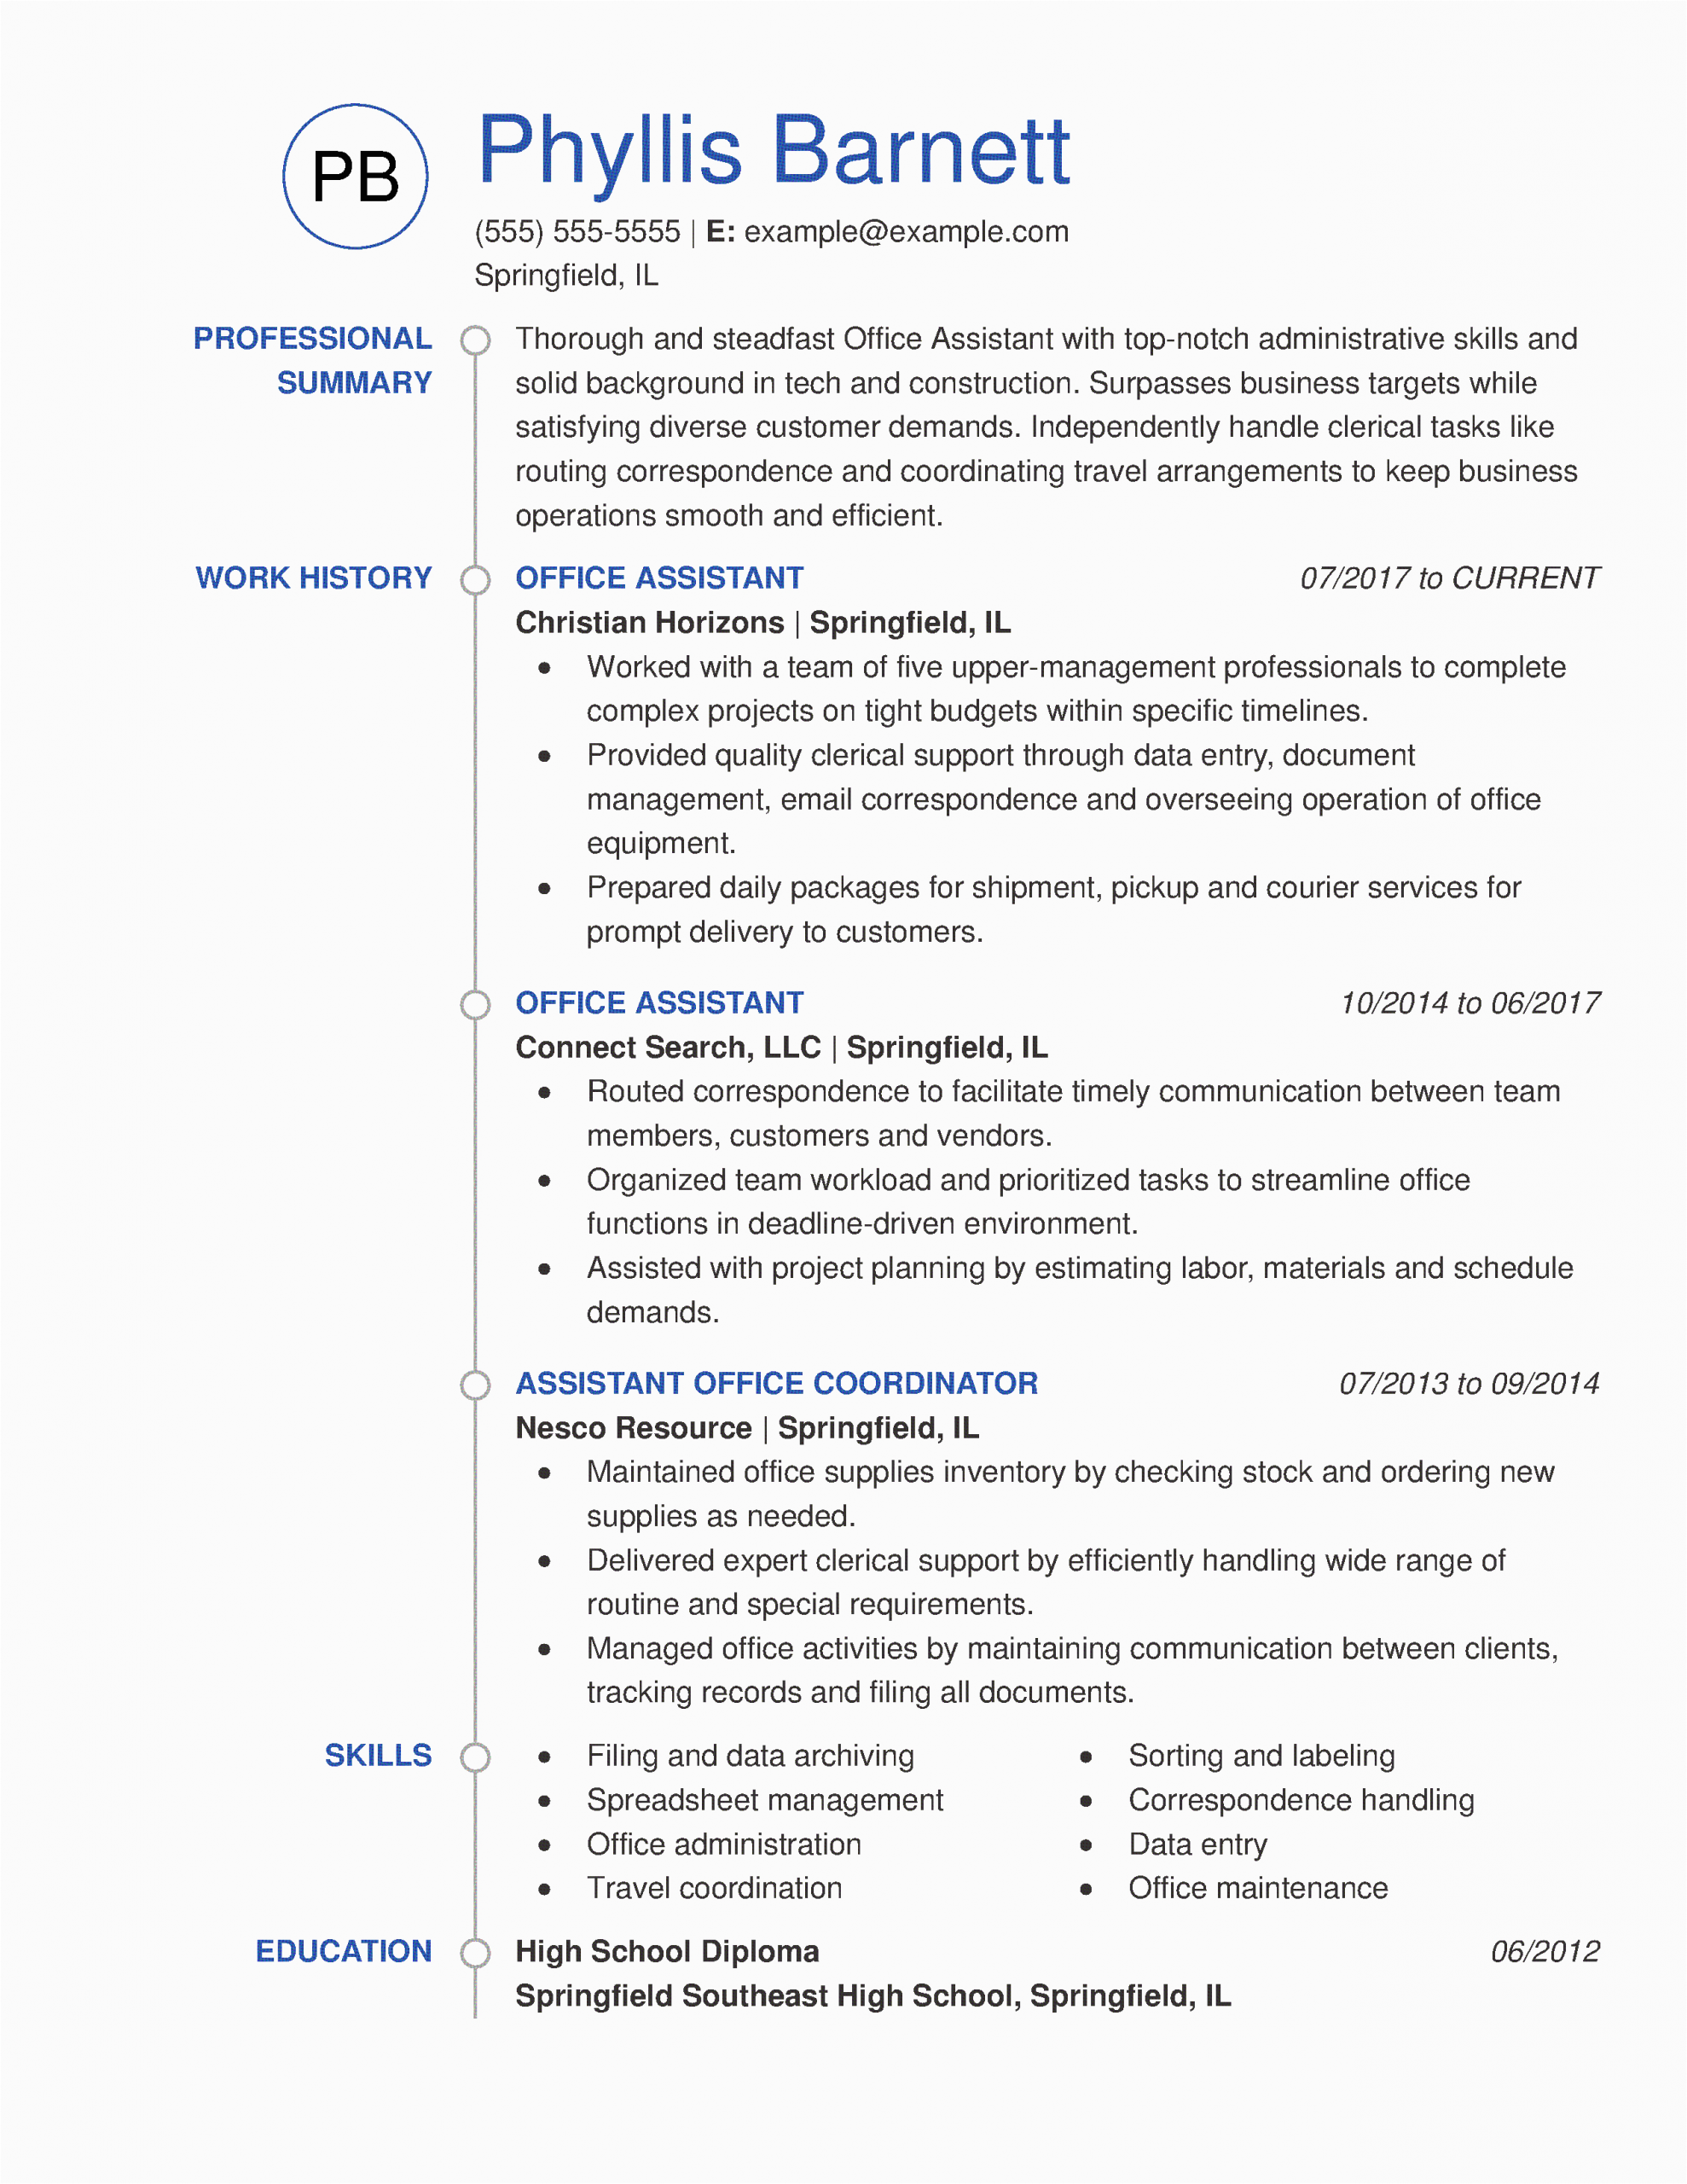 Resume Sample for Office assistant Position 2021 Best Fice assistant Resume Example